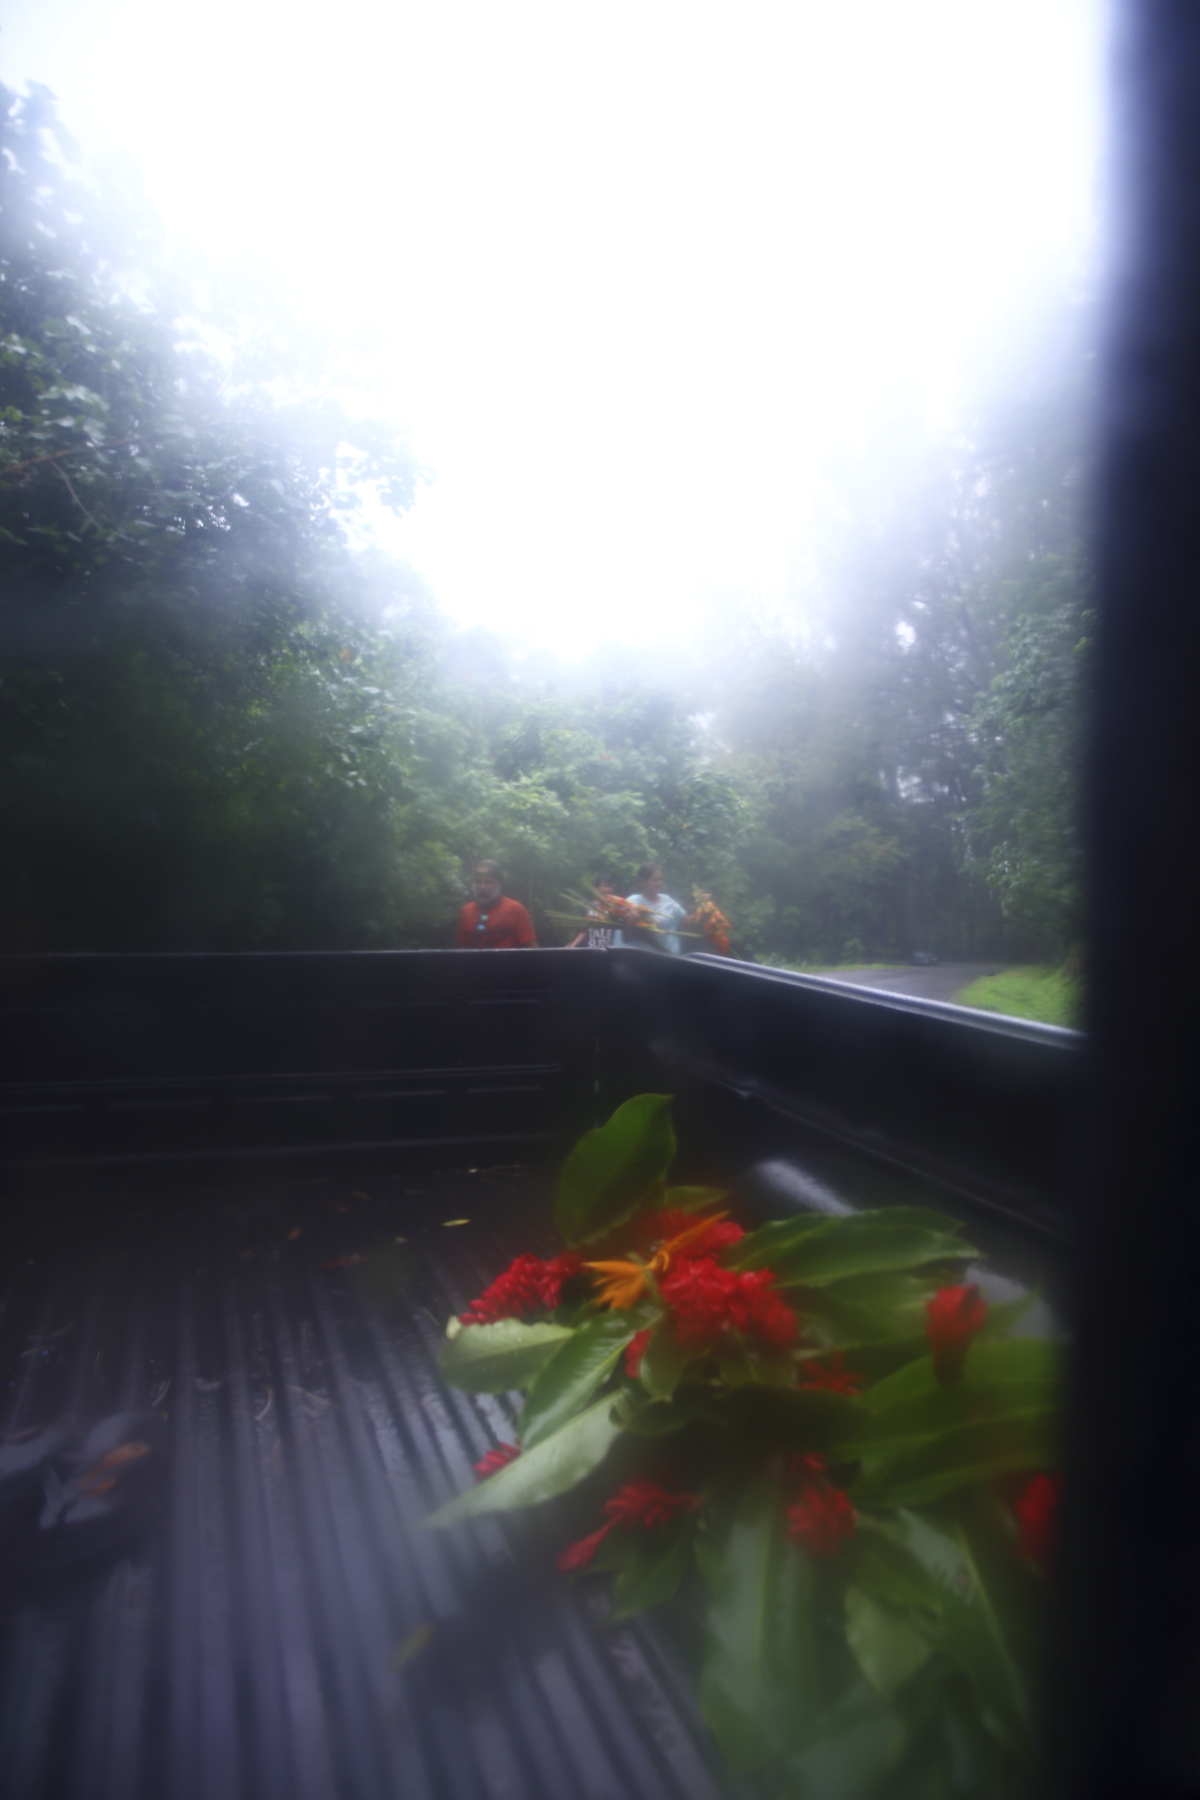 Trip into the rain forest to collect flowers